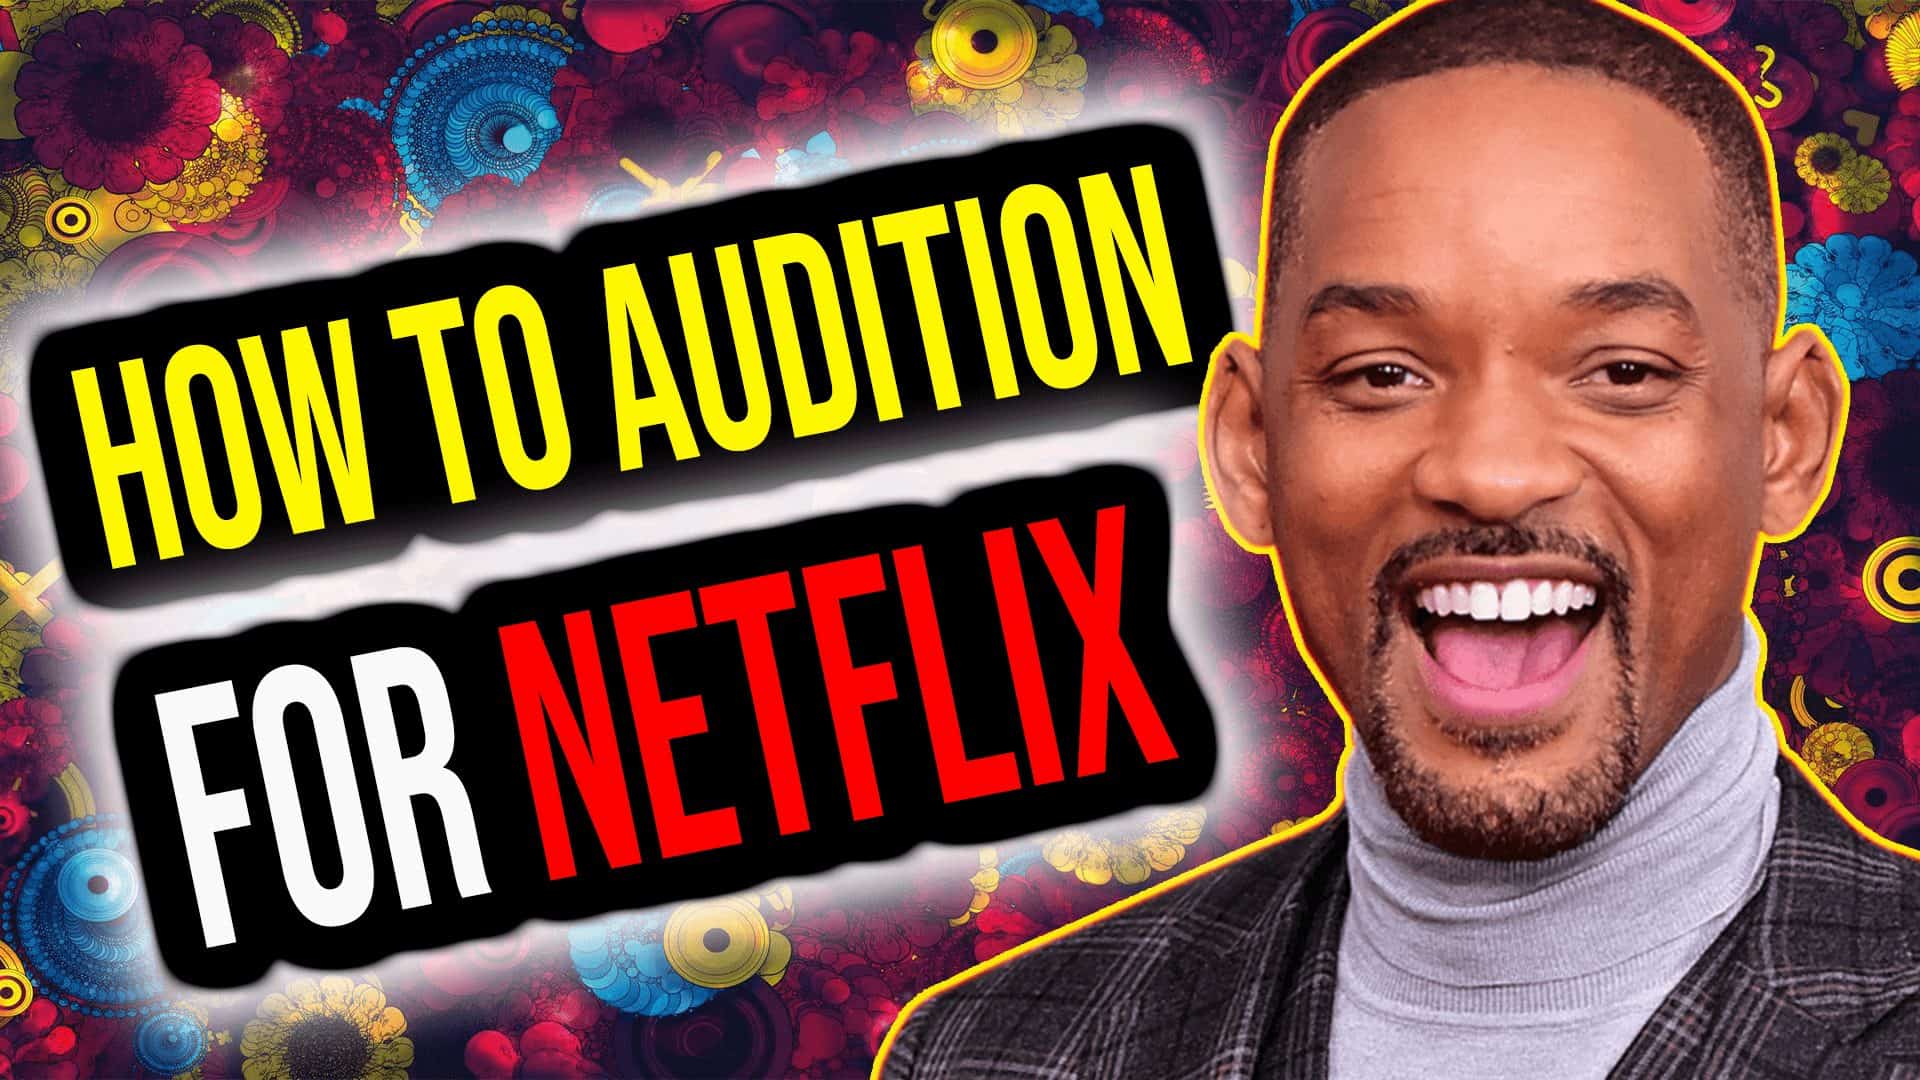 How to Audition for Netflix as an Actor